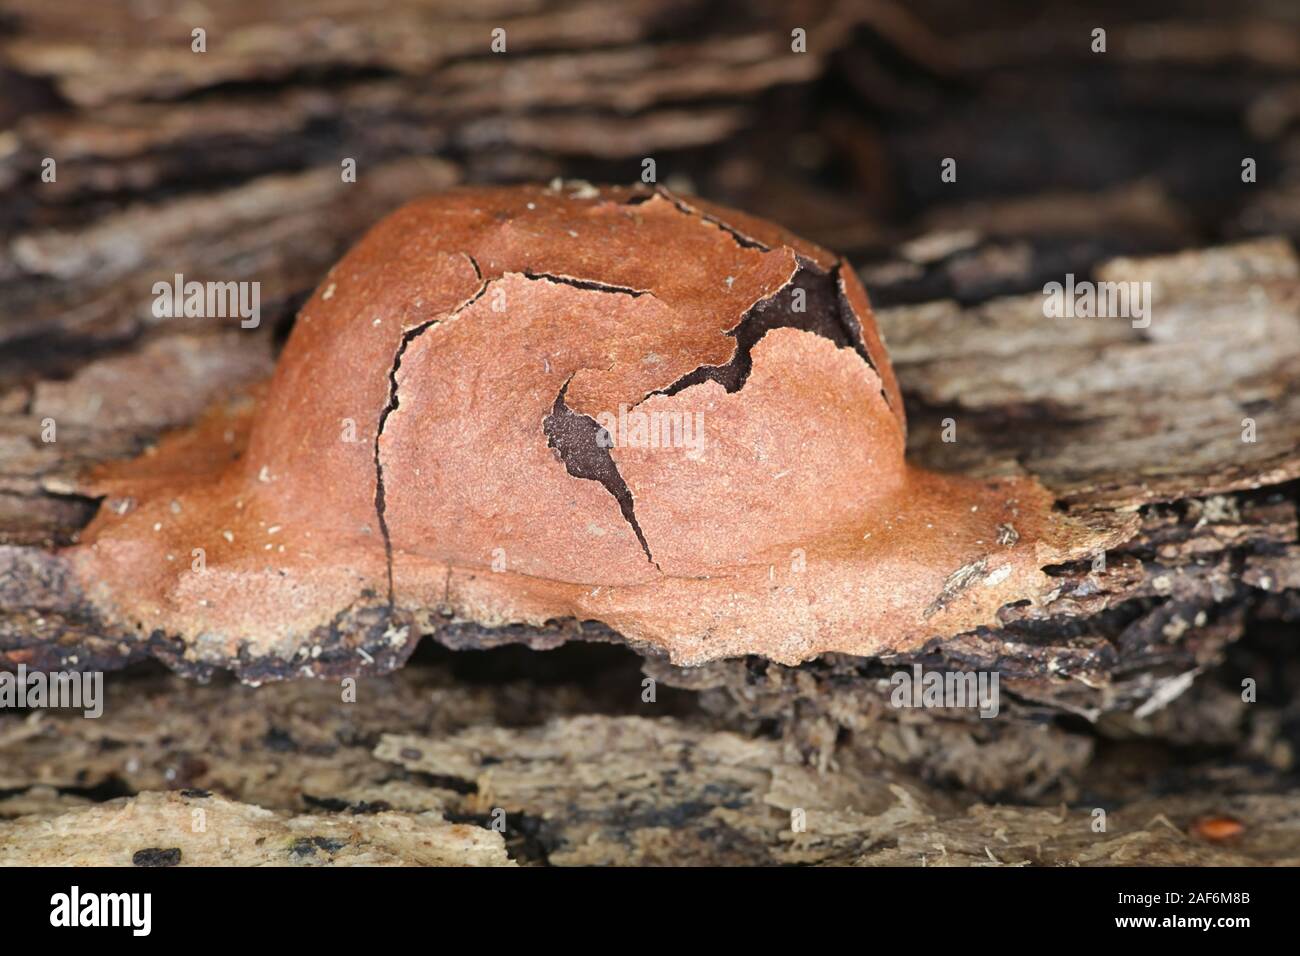 Fuligo leviderma, a plasmodial slime mold or mould from Finland Stock Photo